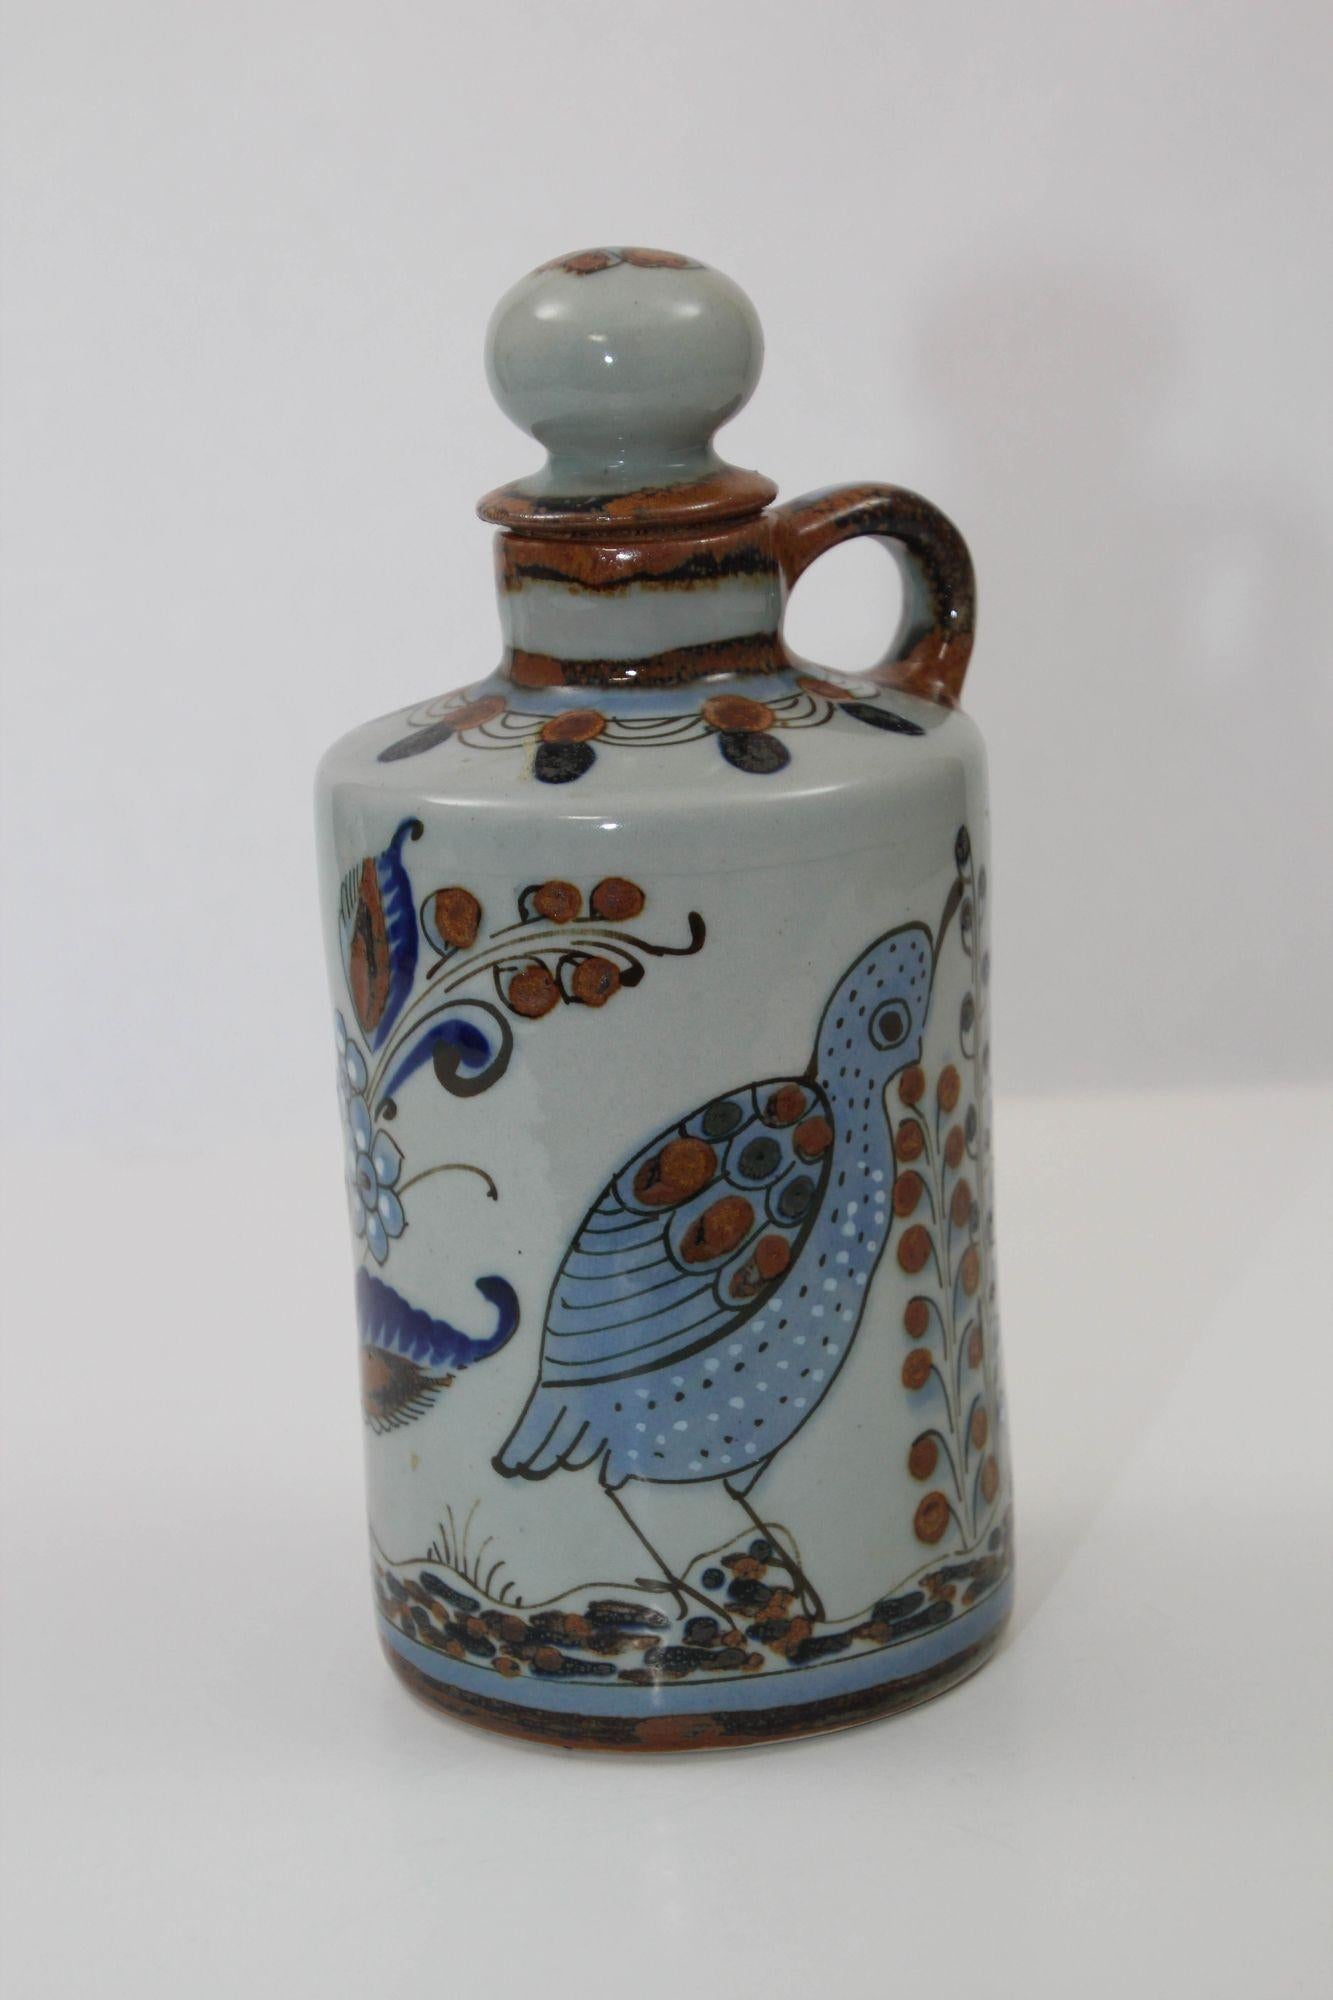 Ken Edwards Hand Painted Signed El Palomar Tonala Mexico Art Pottery Bottle with Cork 1960s.
Vintage Folk Art Mexican pottery handcrafted beautifully hand-painted Tonala bottle with botanical, a quail, another bird, butterflies, and flowers.
Vintage